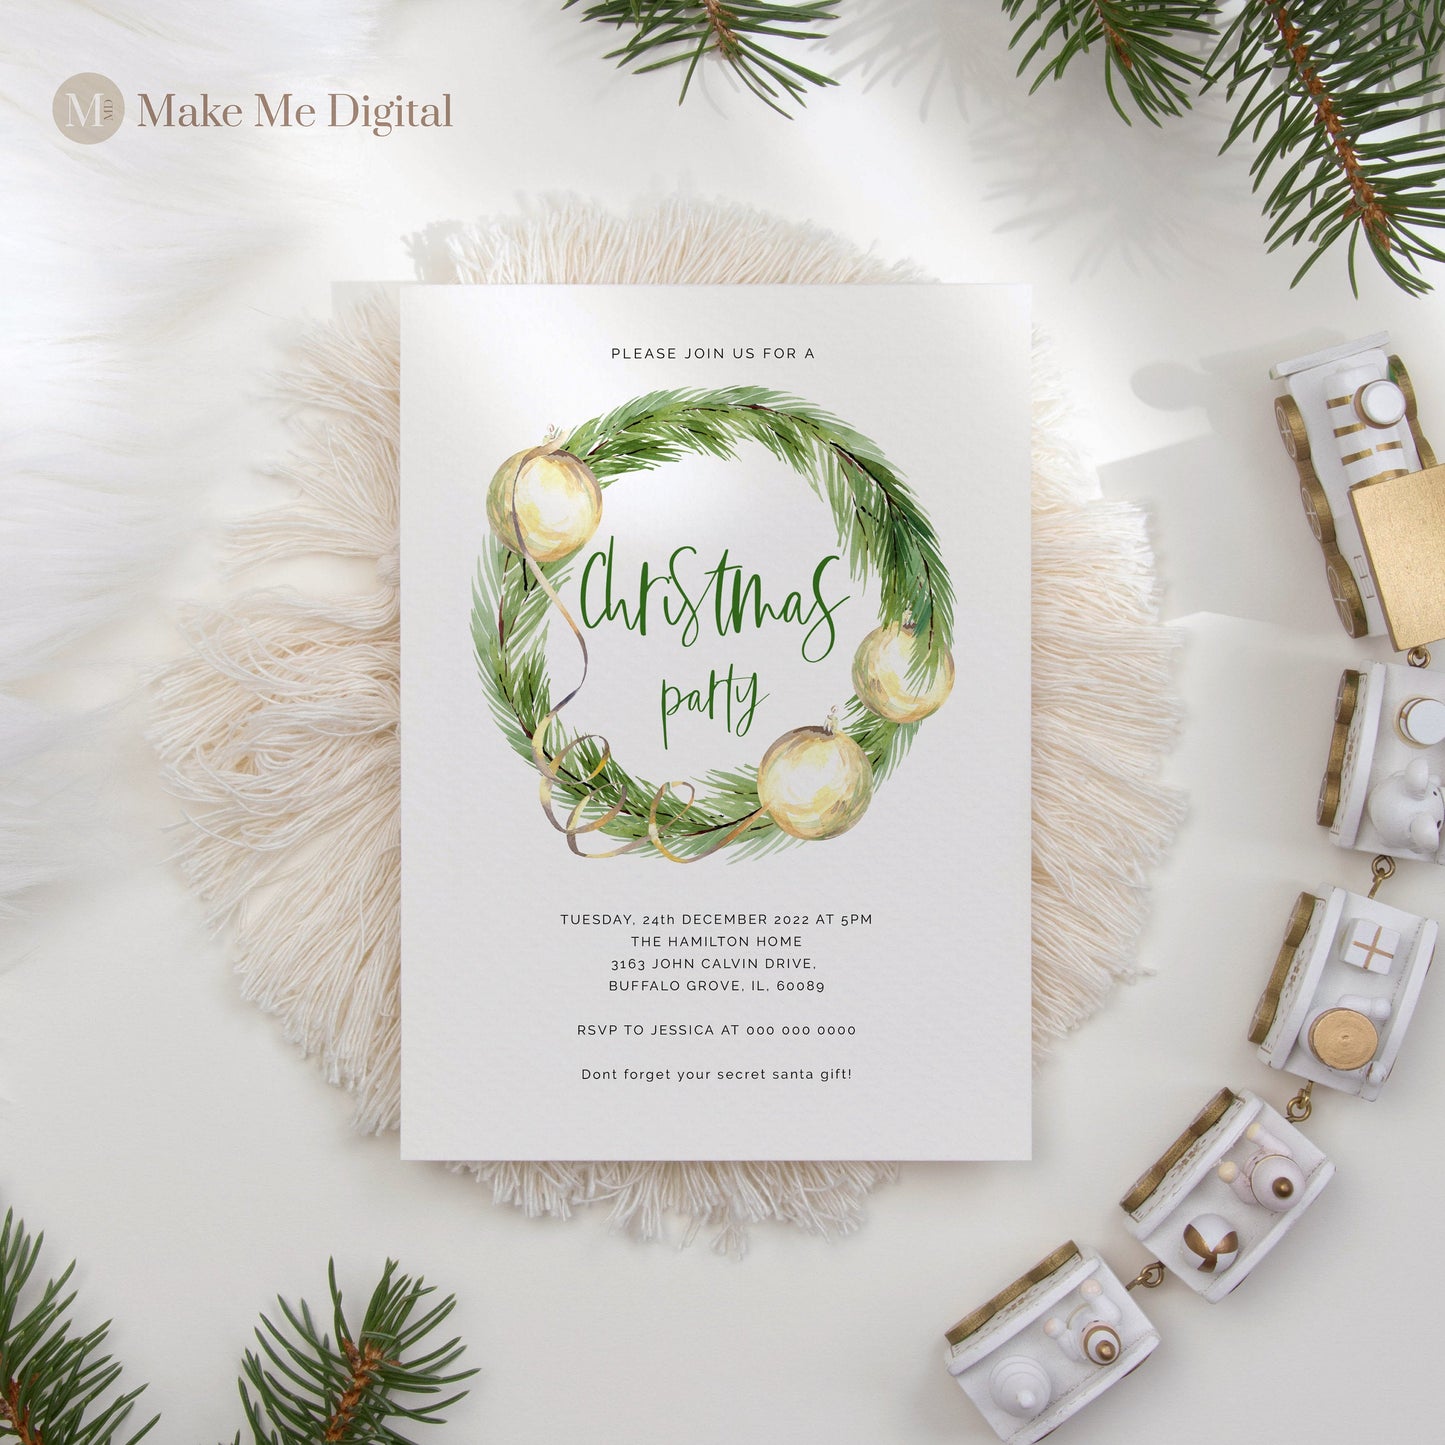 Green & Gold Christmas Party Invitation - Make Me Digital: printable event invitations, party games & decor